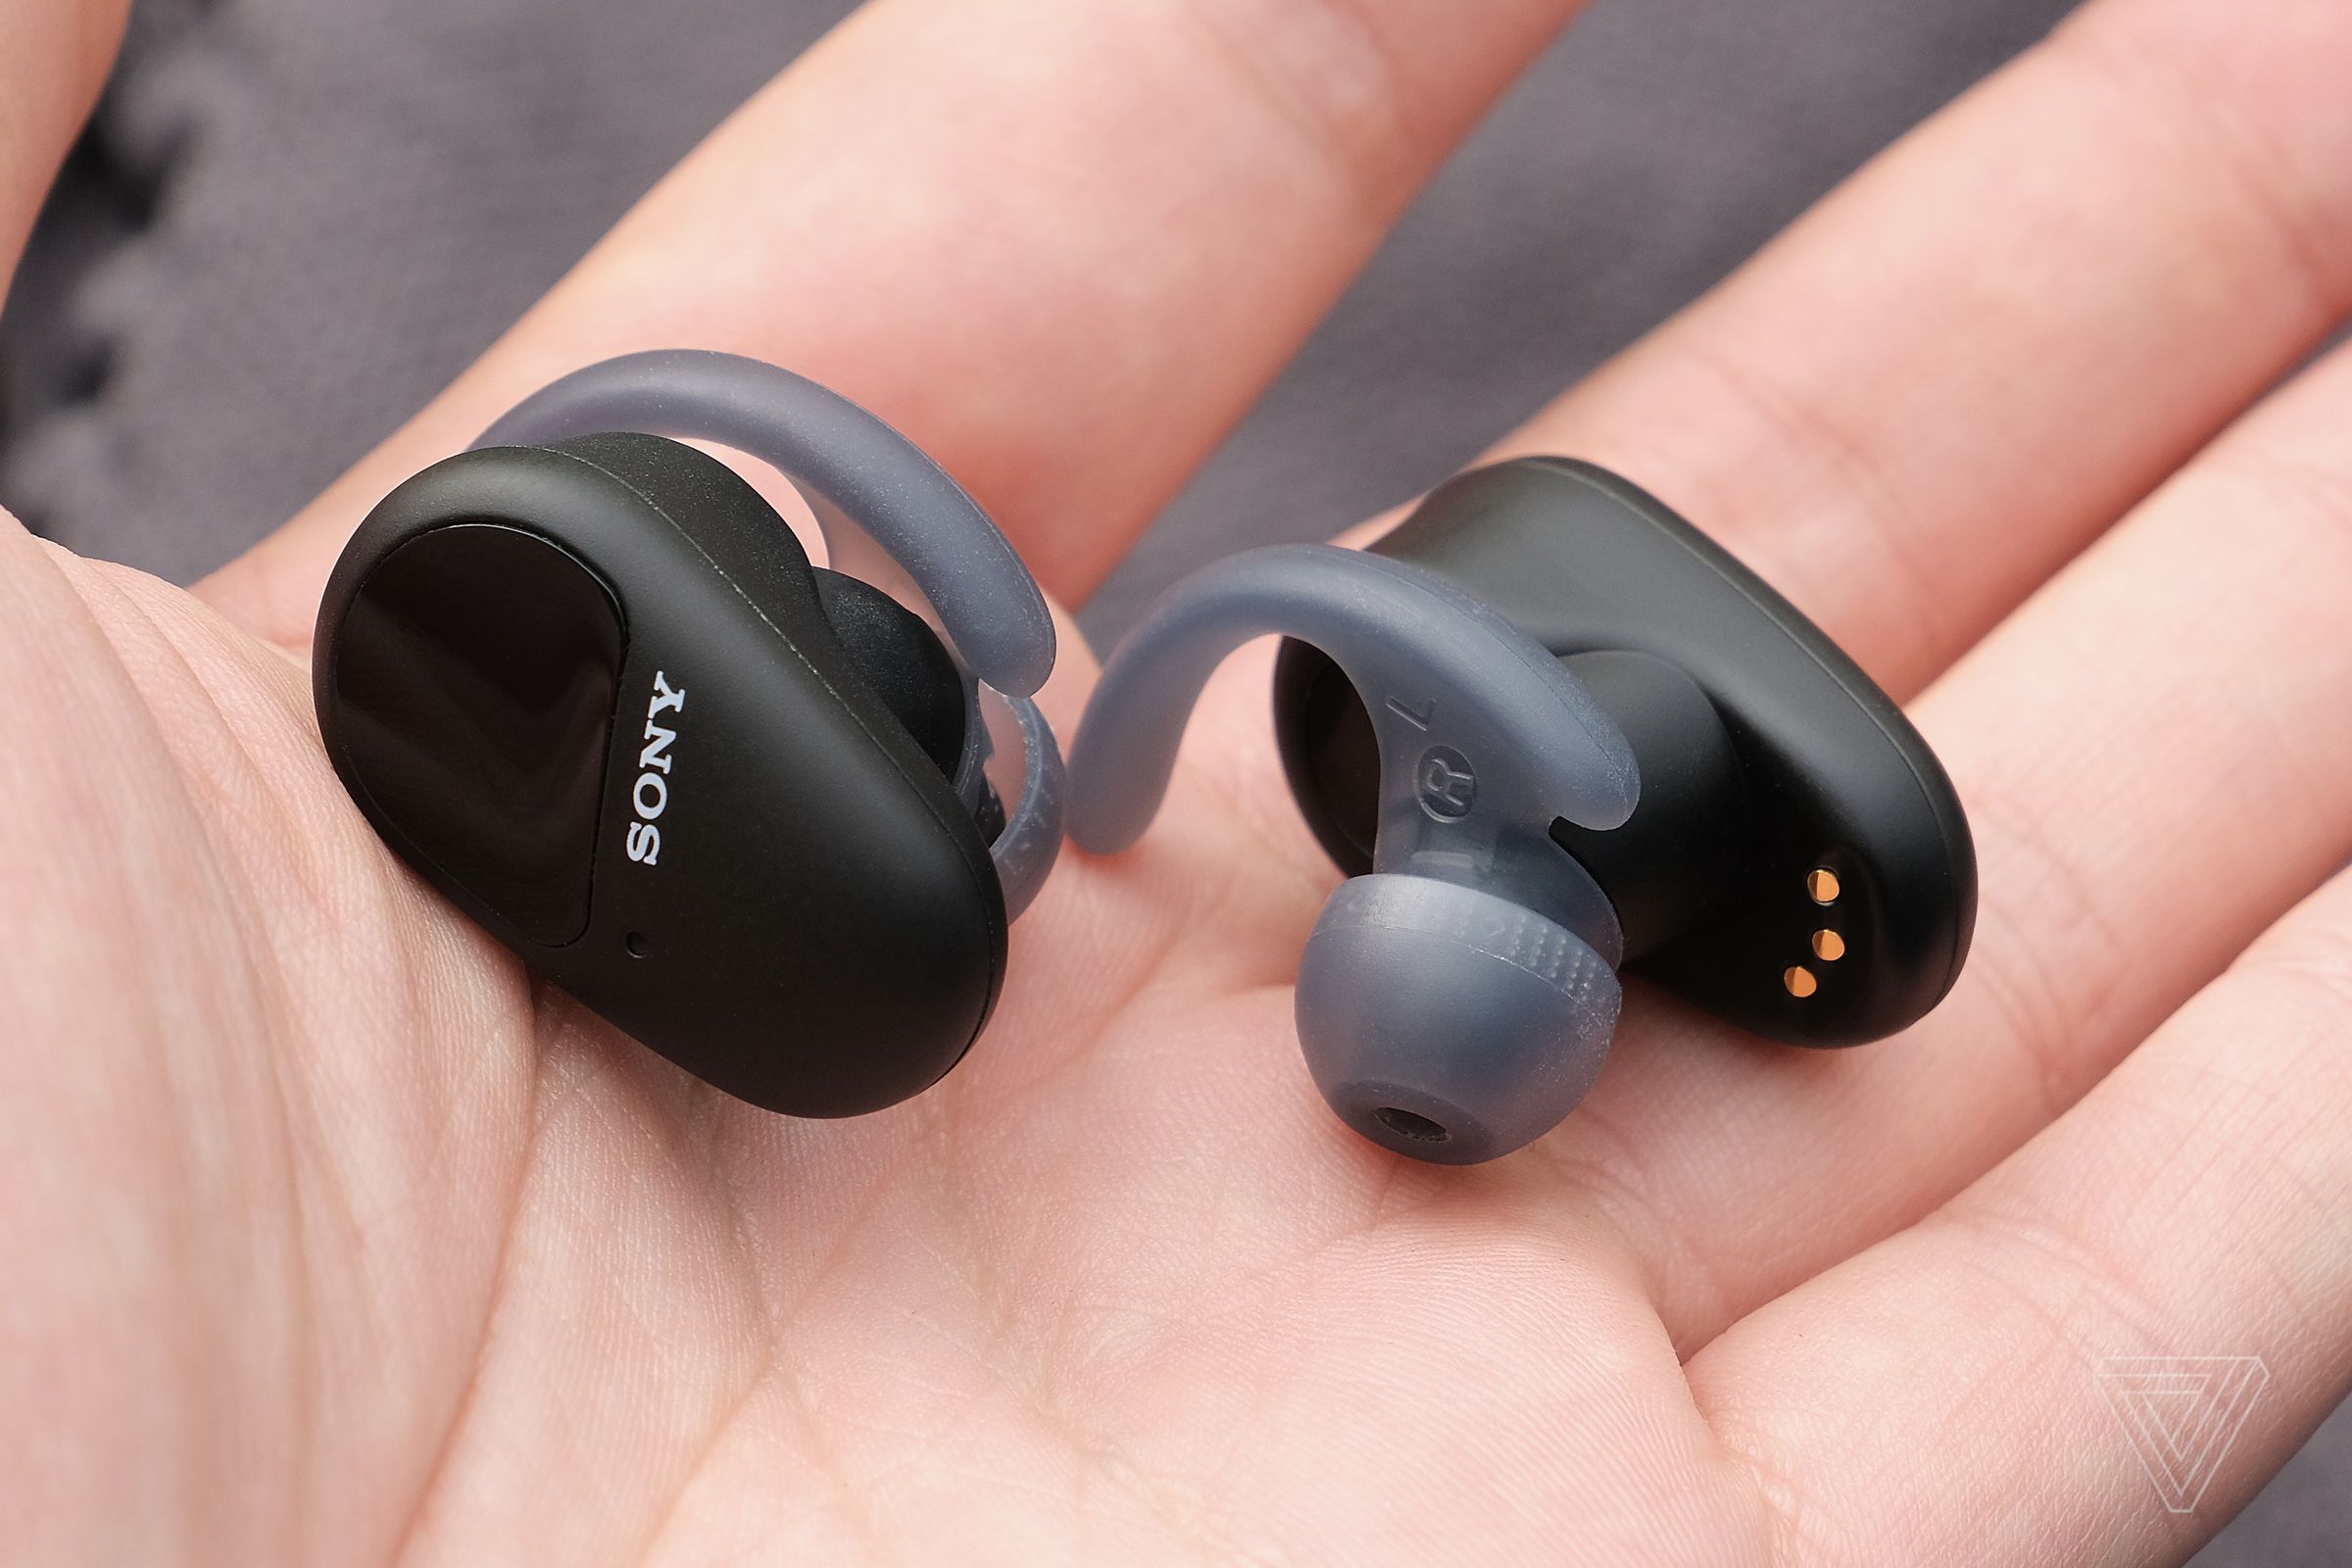 An image of Sony’s SP-800N earbuds in a hand, showing both sides of the earbuds.